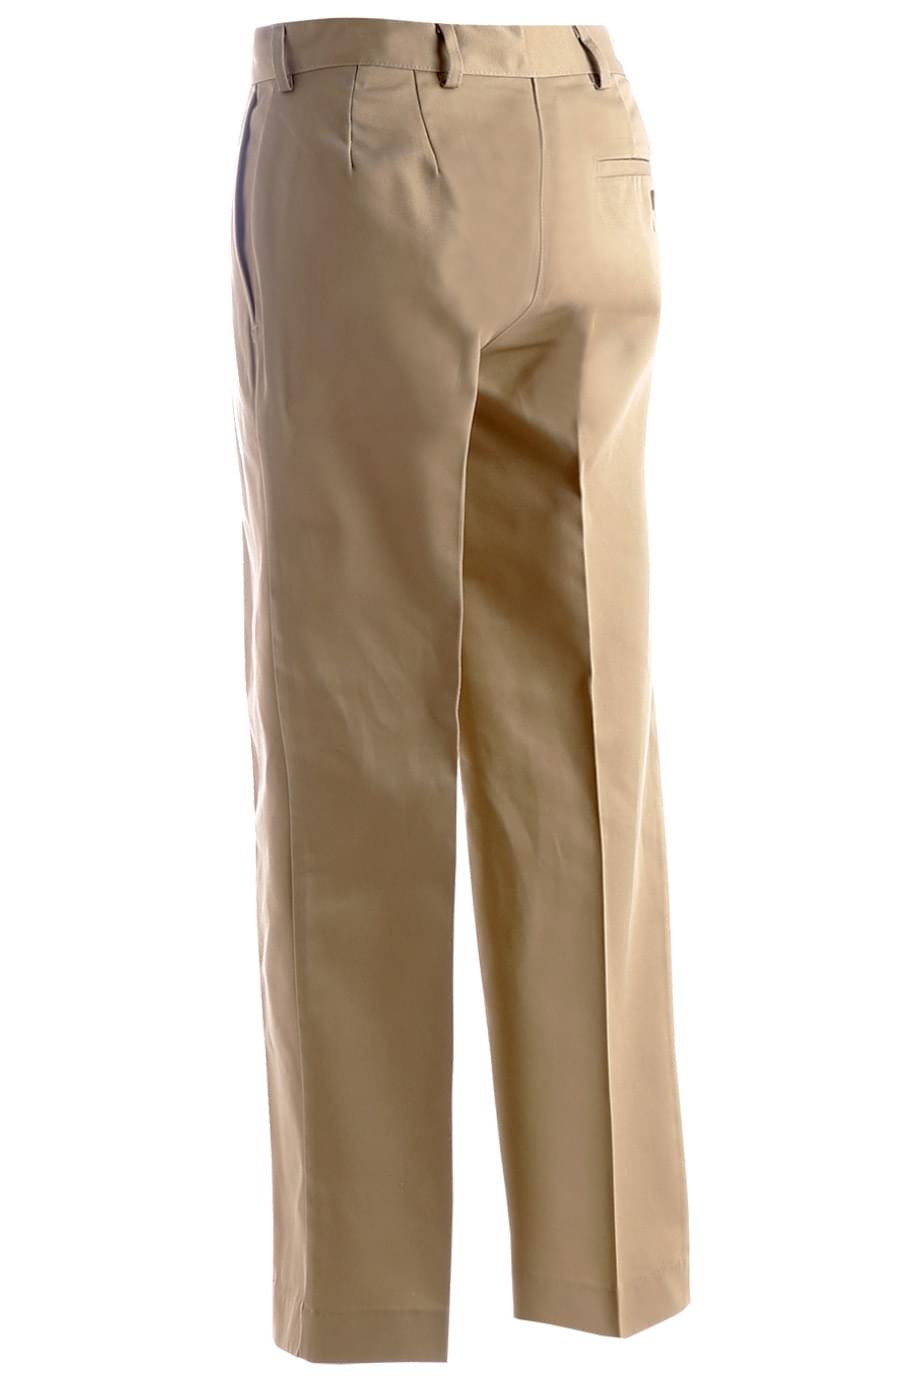 BLENDED CHINO FLAT FRONT PANT